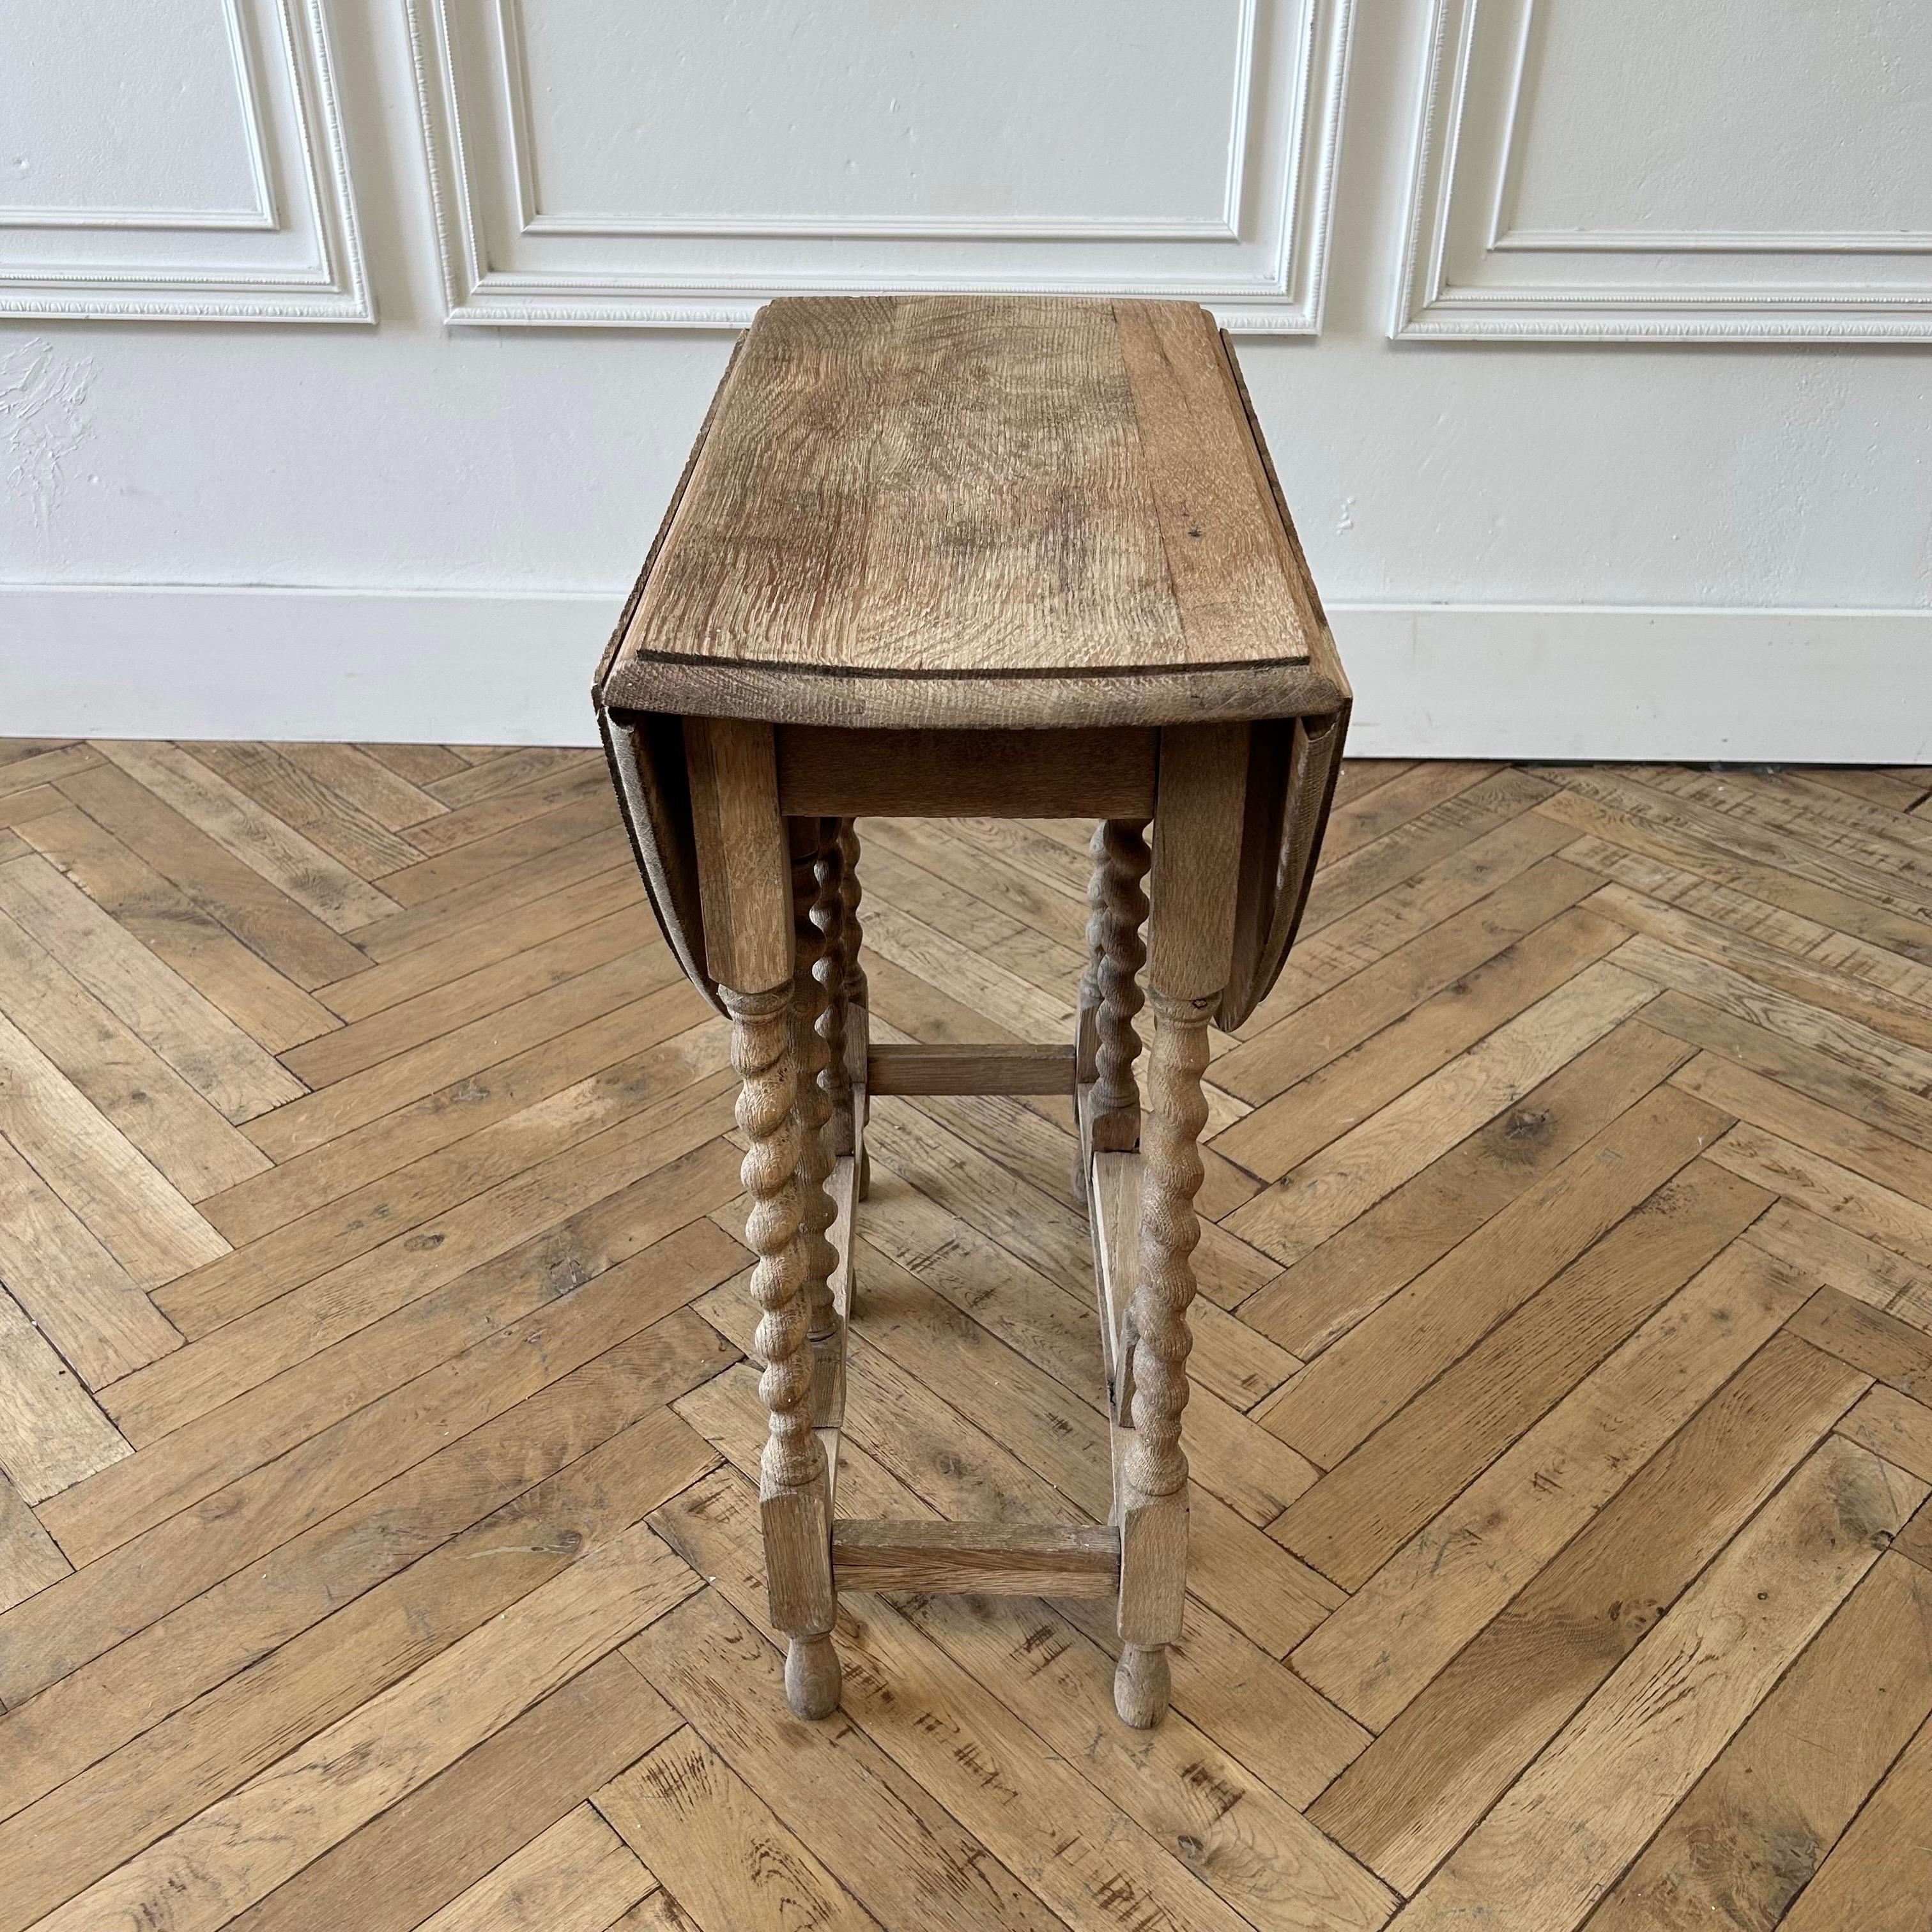 A French carved double gate-leg table from the early 19th century. 
Oak table 35”W x 24”D x 28-1/2”H.
Folded: 12-1/2”W
This antique table from France has an oval-shaped top with two drop leaf sides, that when down, make this medium sized table, a